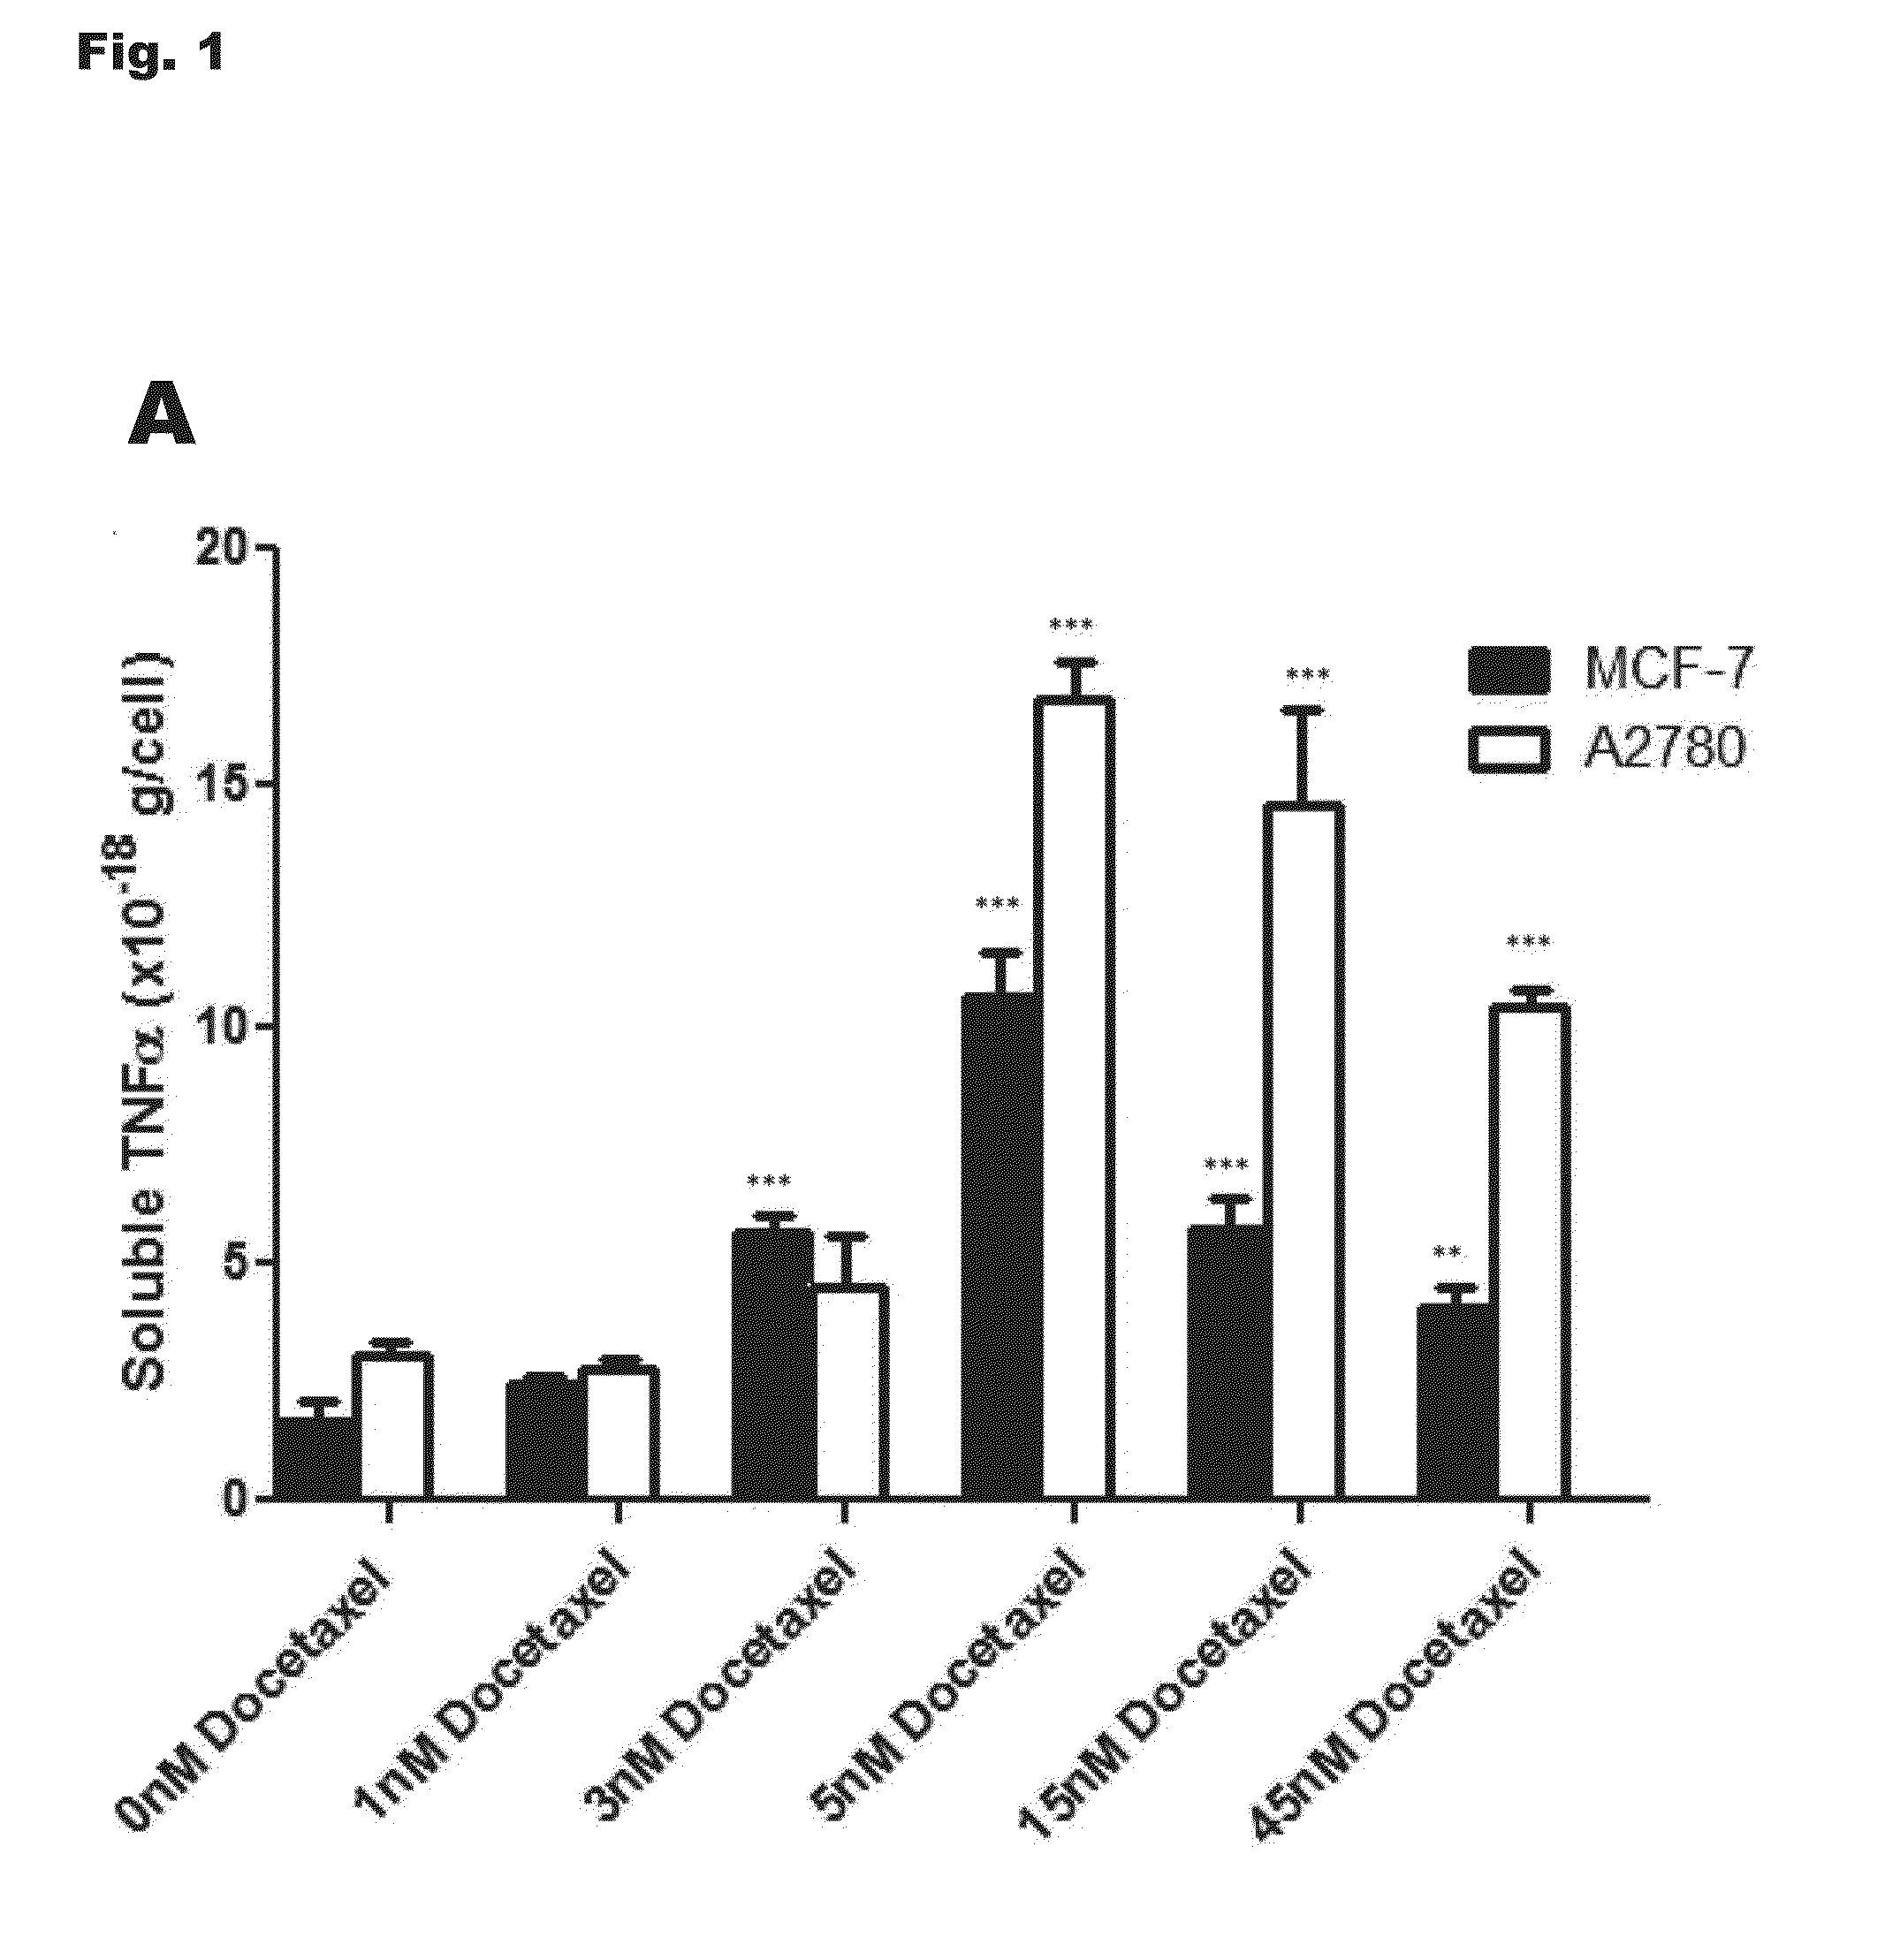 TNF-Related Biomarkers For Assessing Cancer Cell Response To Treatment With Taxane And/Or Anthracycline Drugs